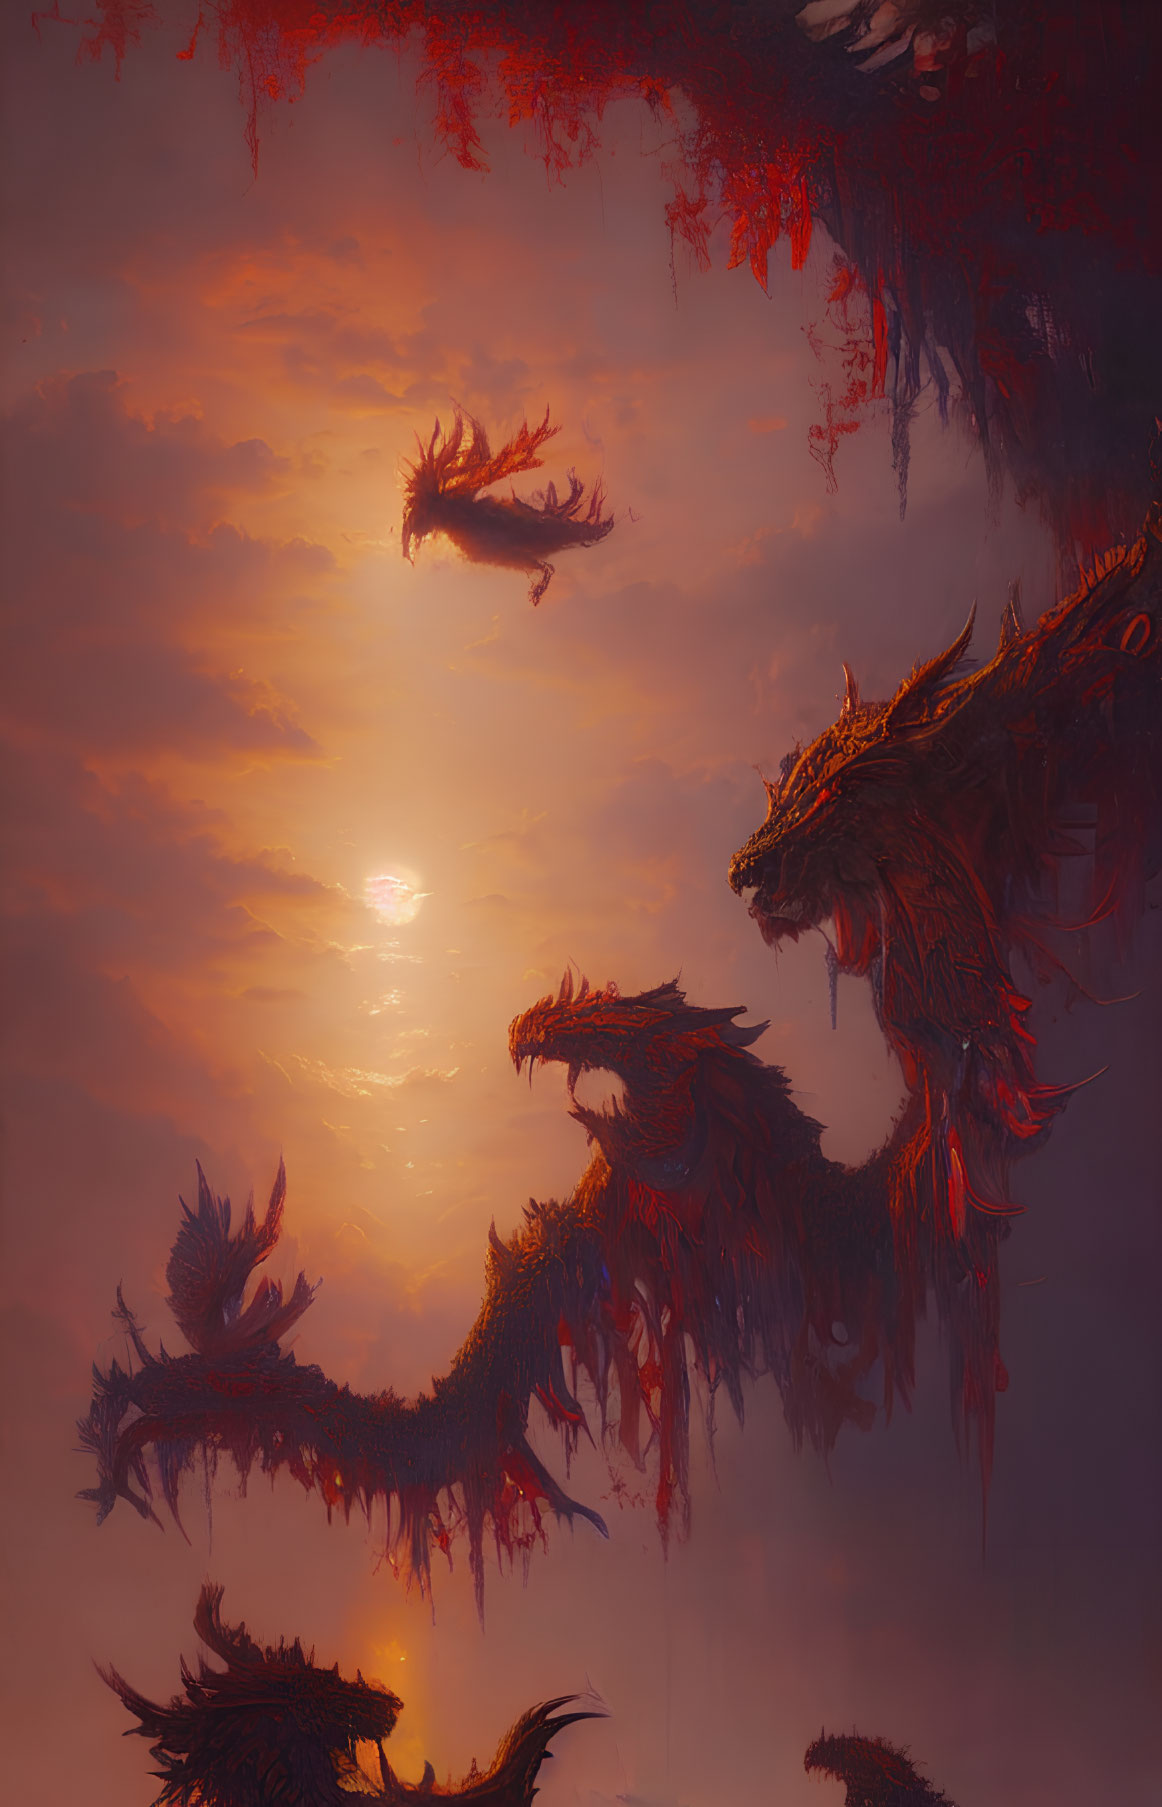 Dragons circling a sunlit axis in a mystical sky full of ancient magic